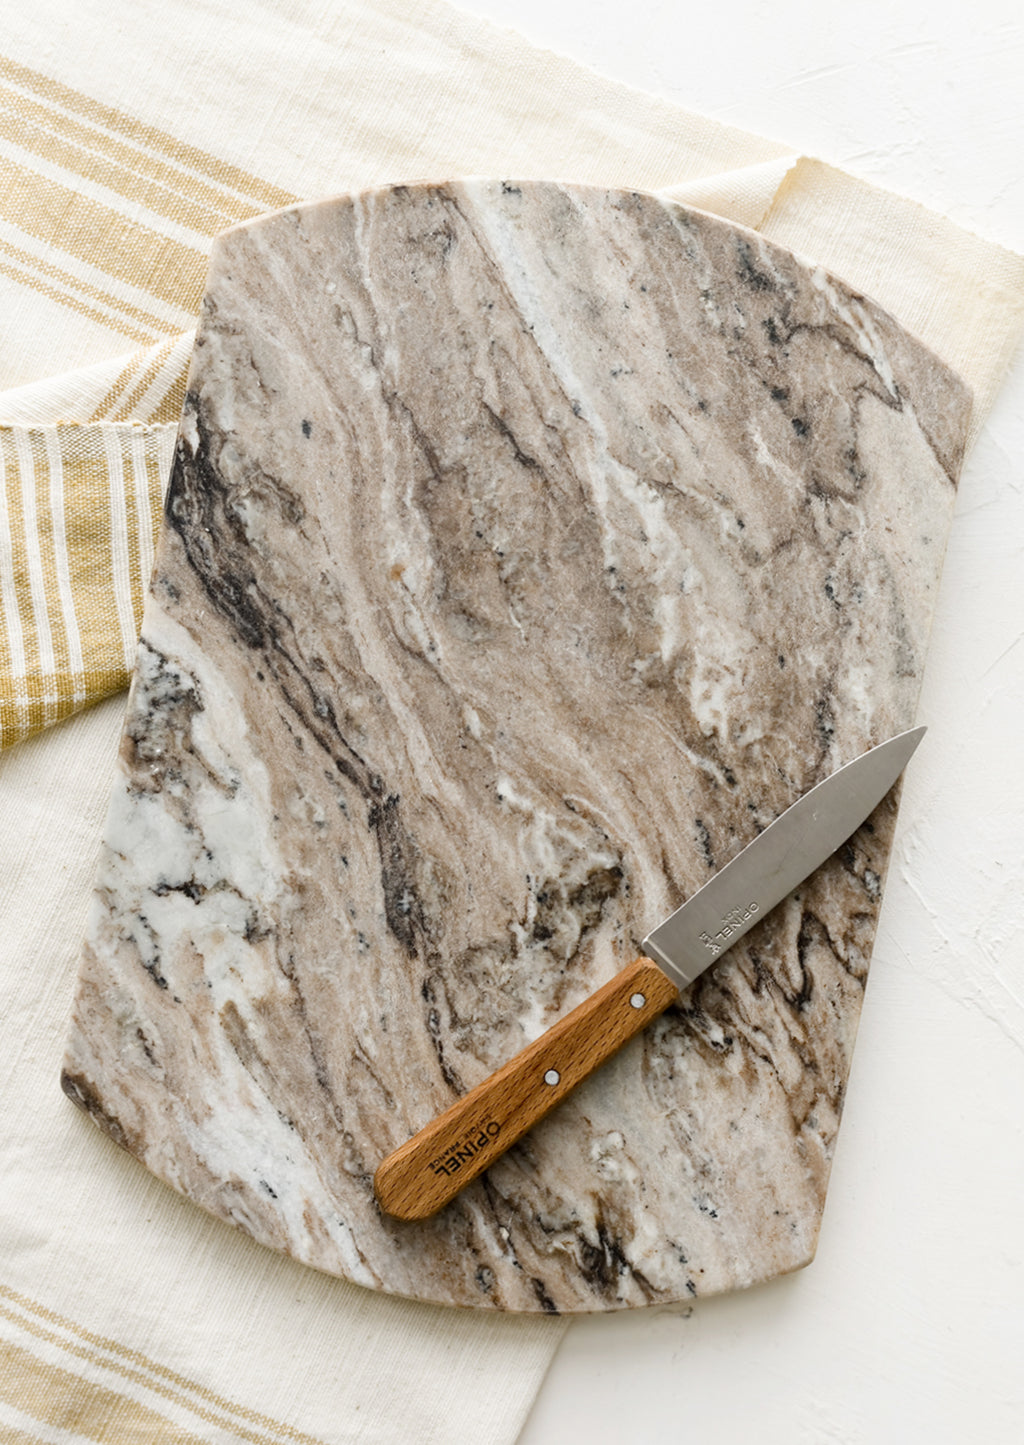 2: a rectangular marble serving board with rounded sides next to a hand towel and knife